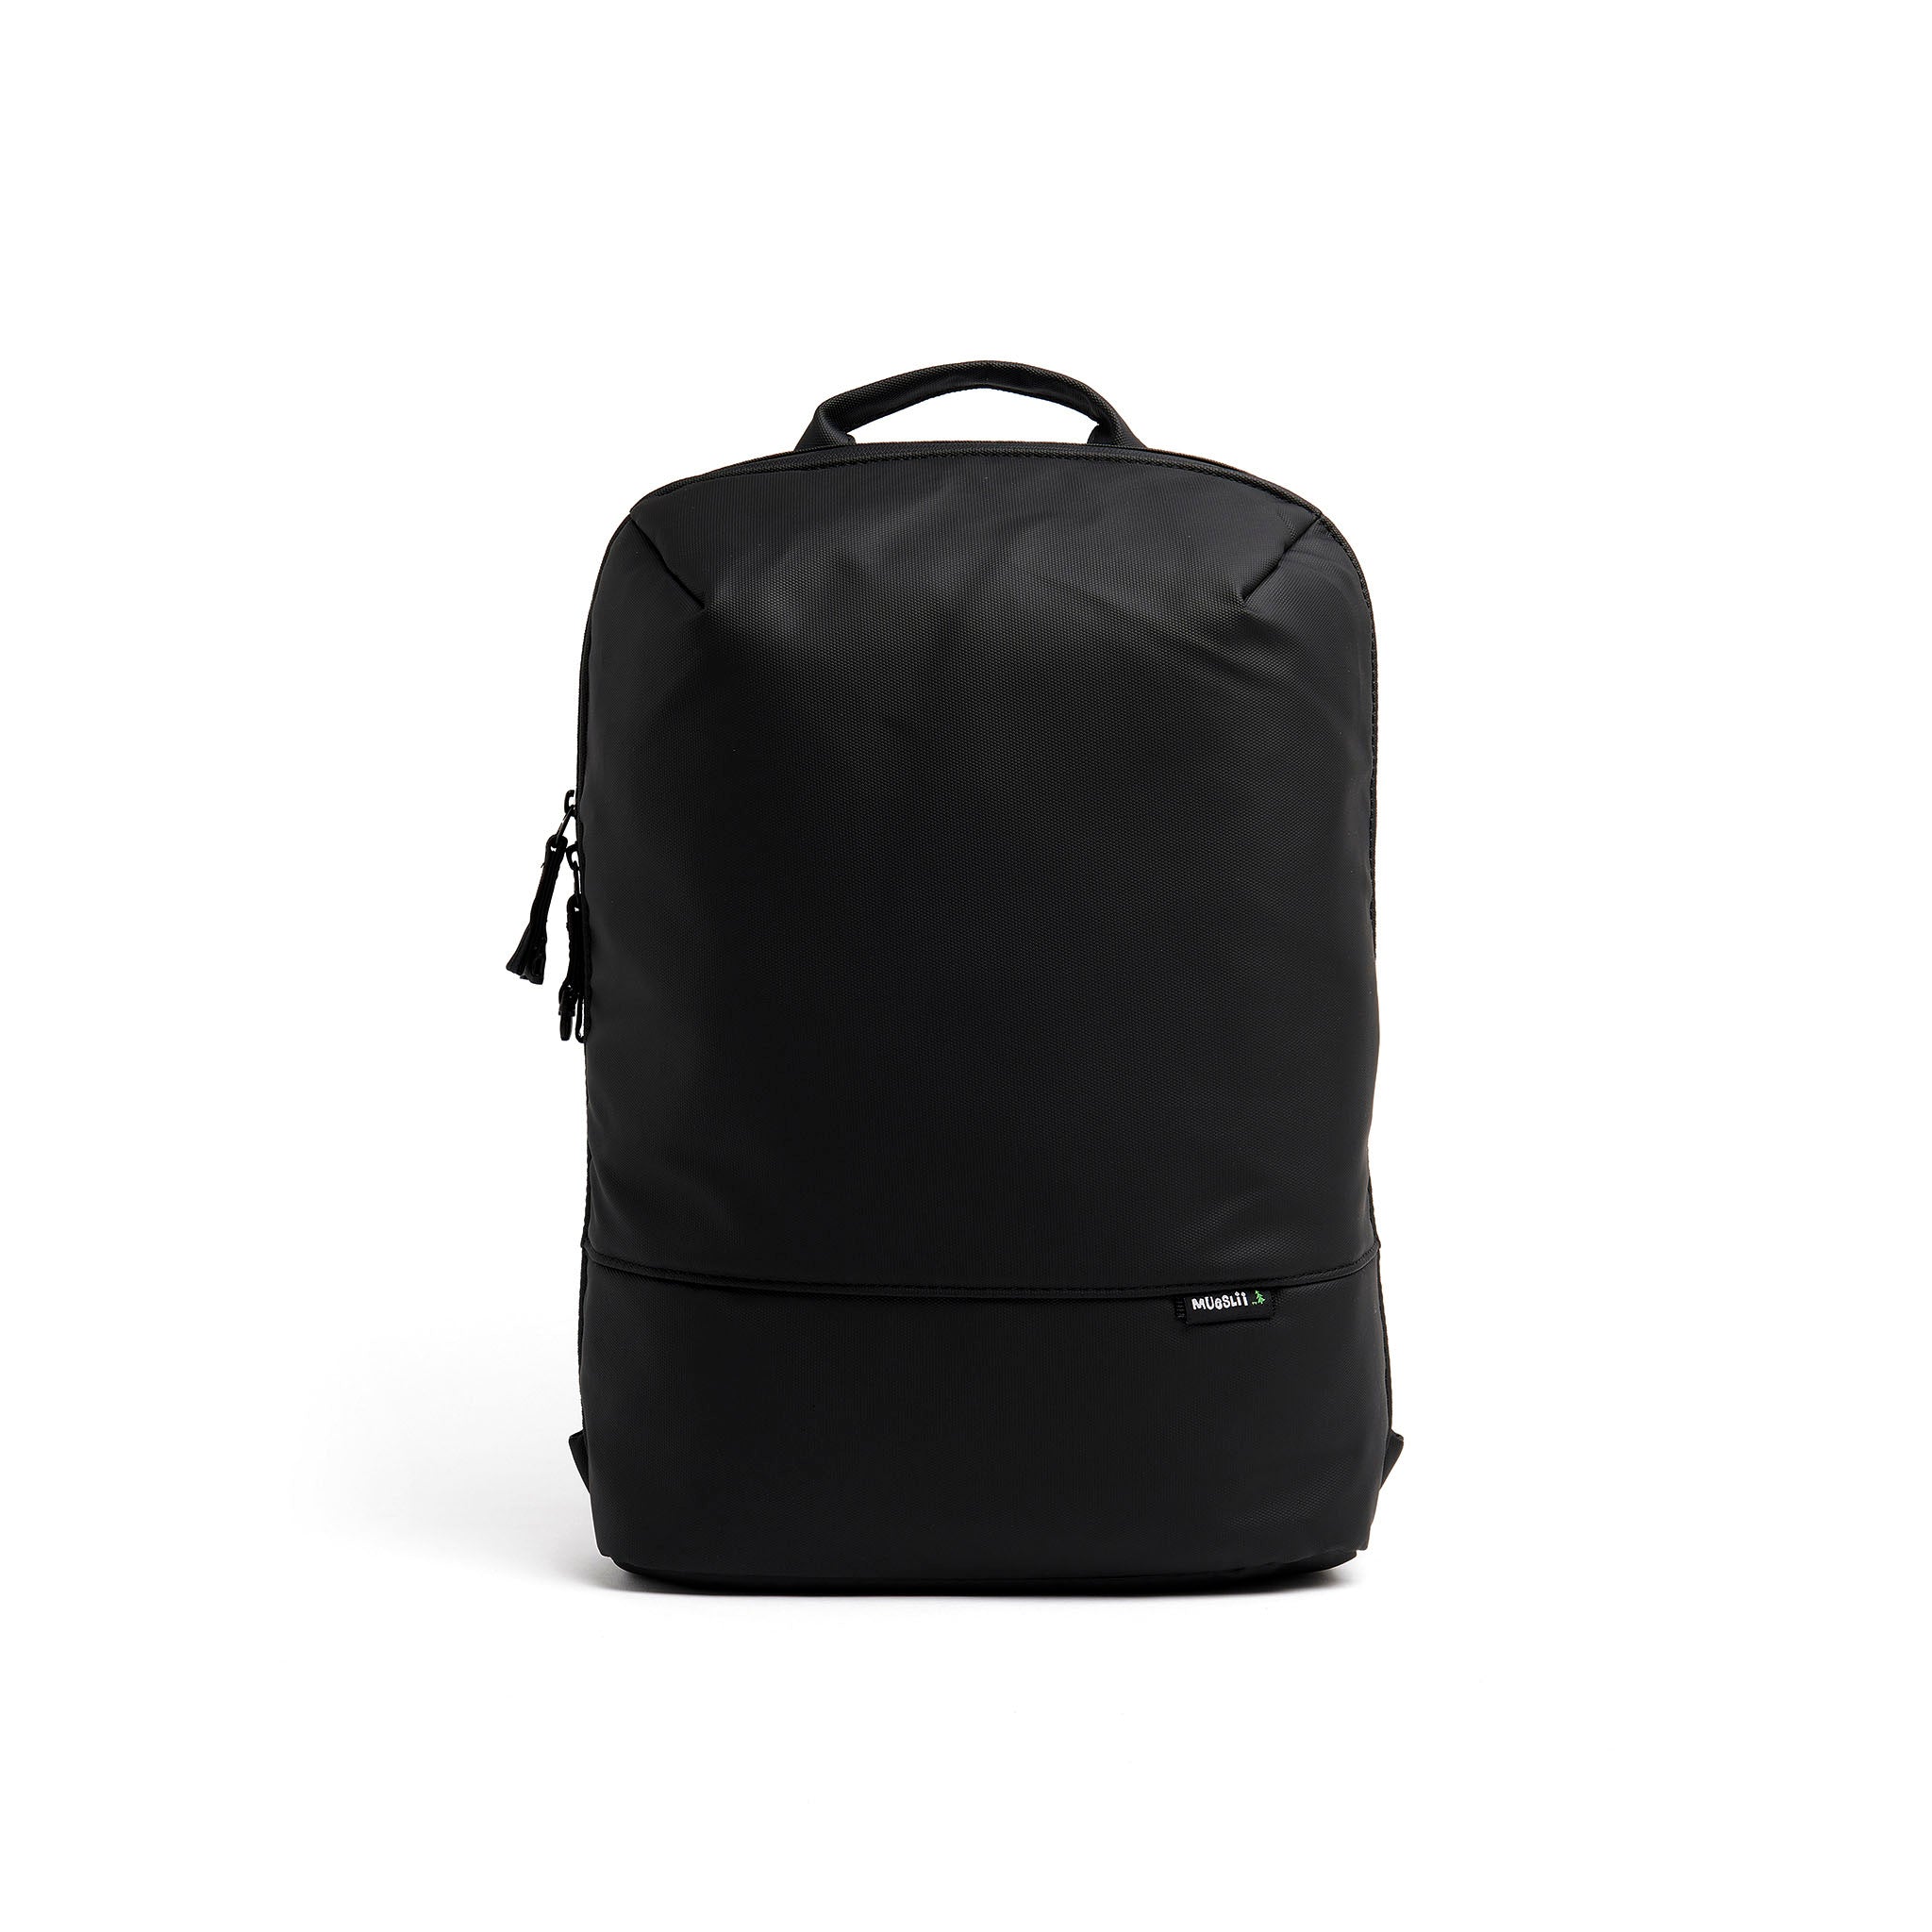 Mueslii daily backpack, made of PU coated waterproof nylon, with a laptop compartment, color coal black, front view.